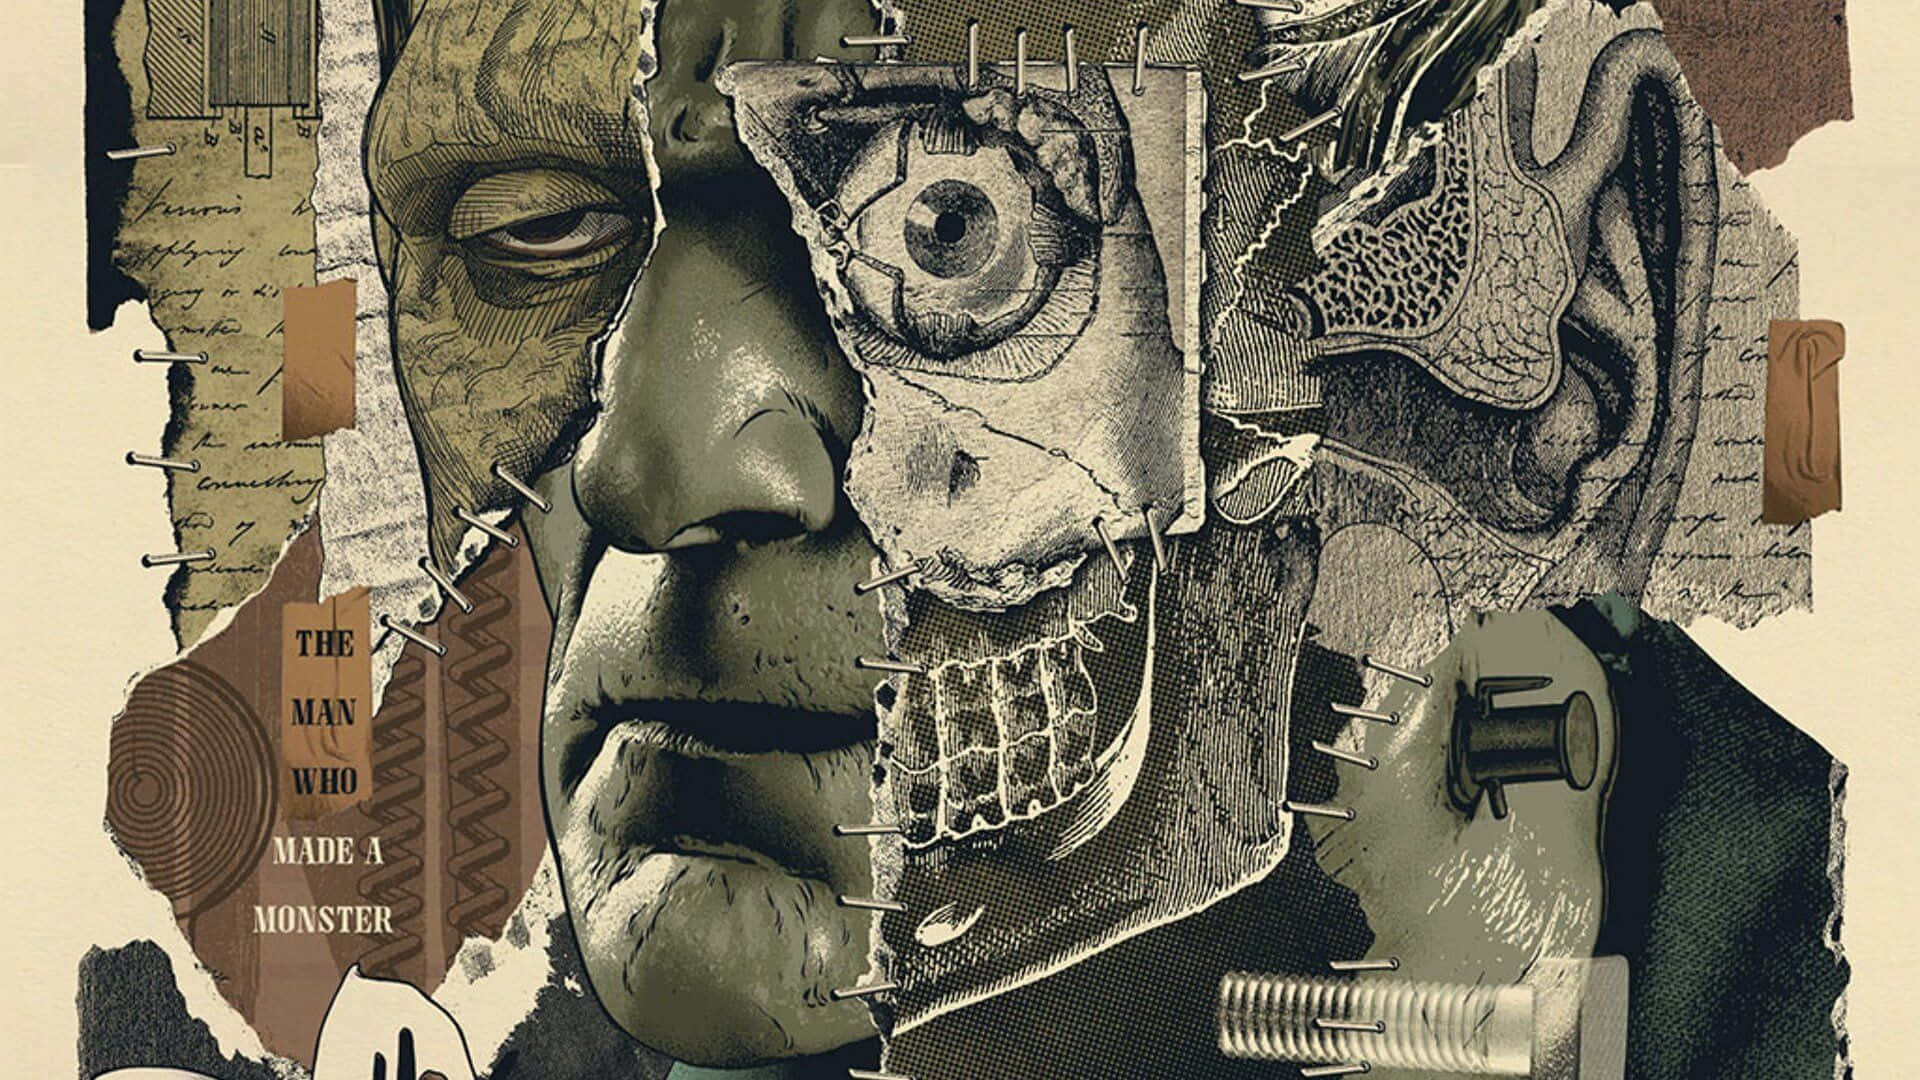 Artistic Mosaic Of Universal Monsters Characters Background